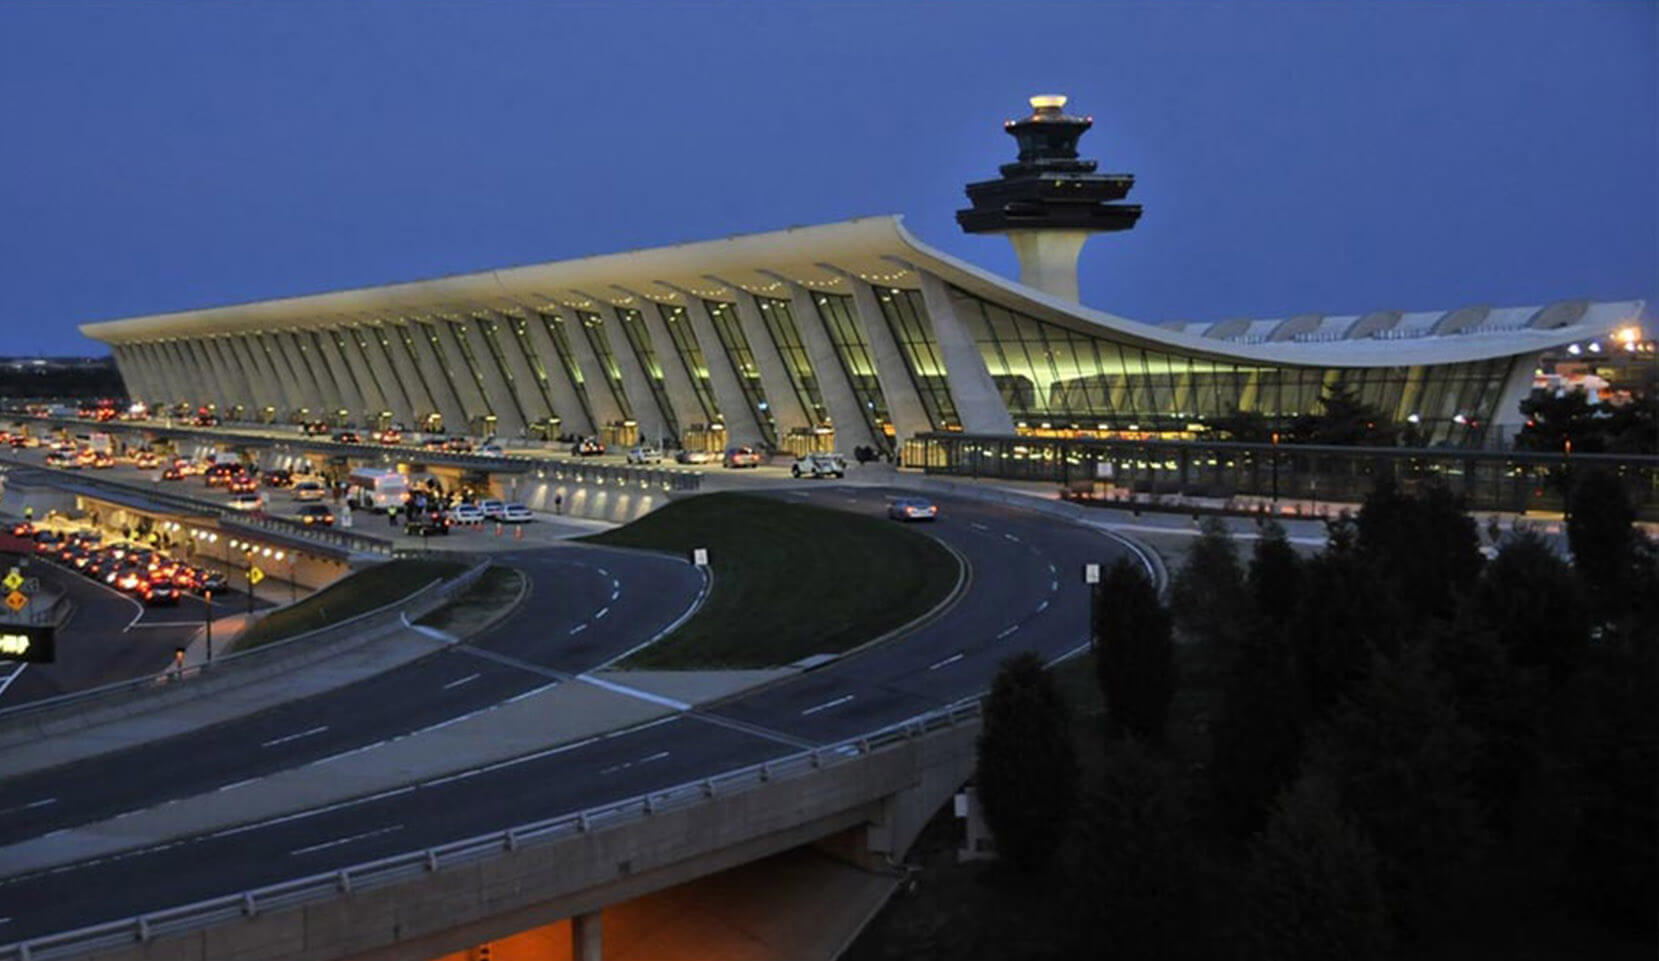 Dulles International Airport with sleek car service available for travelers heading to Baltimore